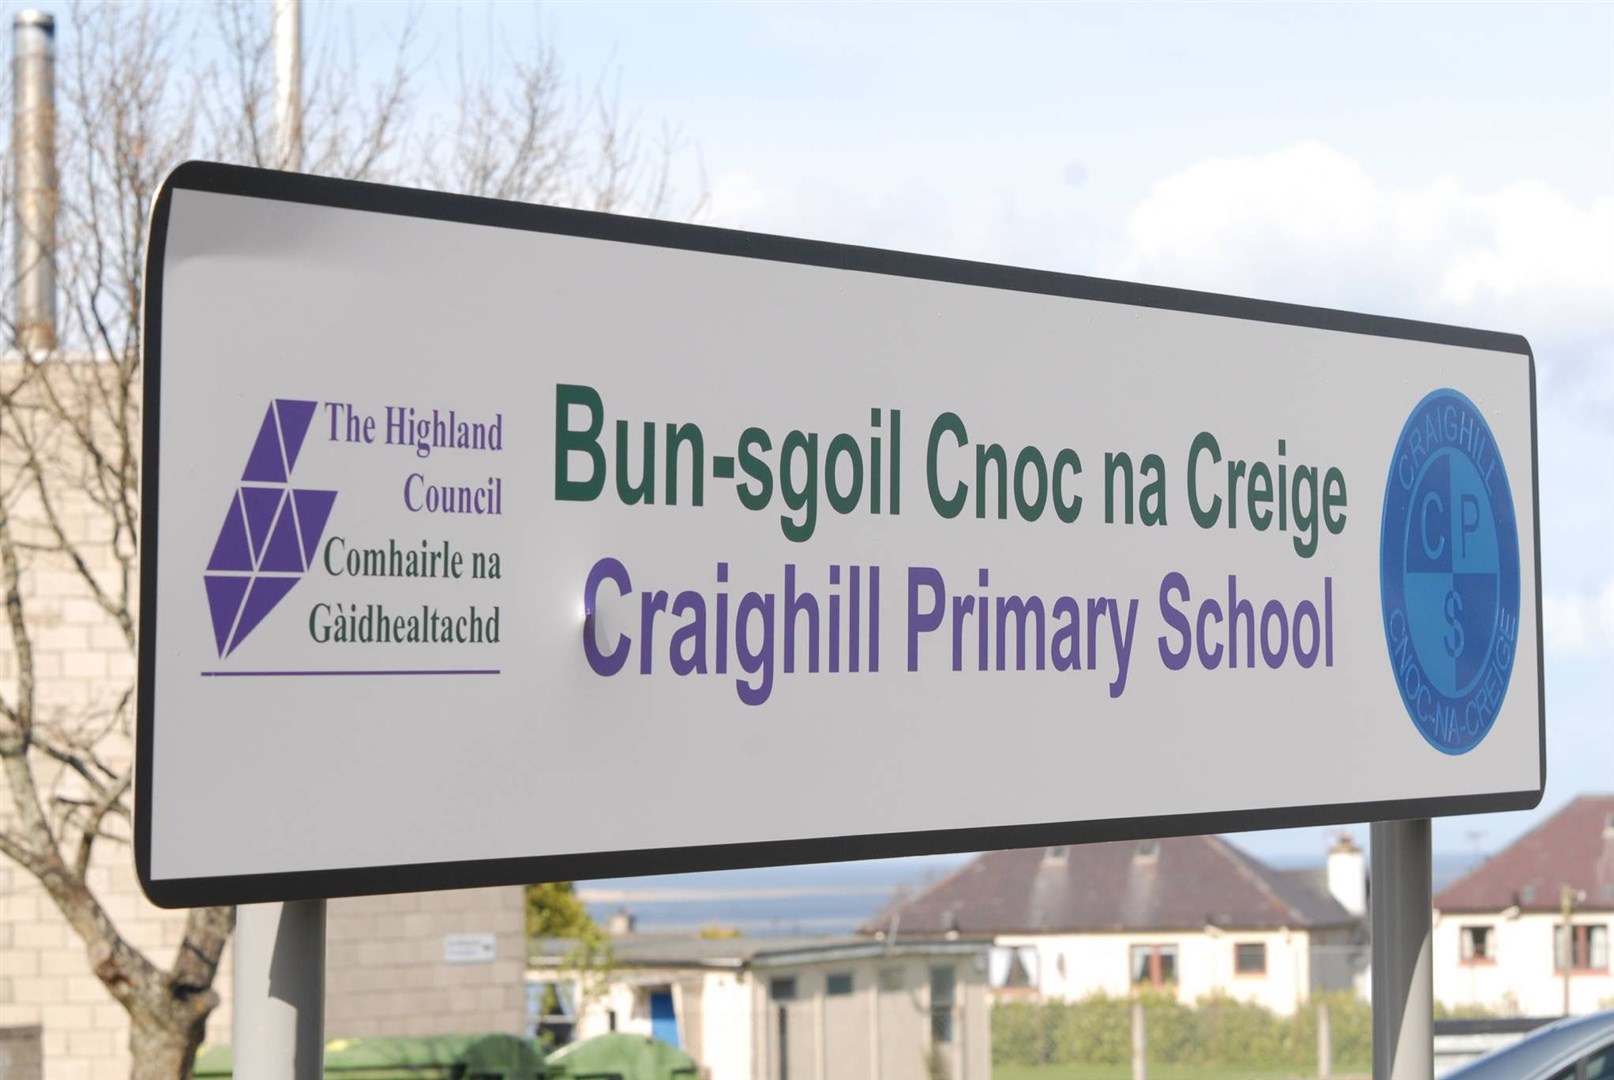 Craighill Primary School in Tain is one of two schools closed today.